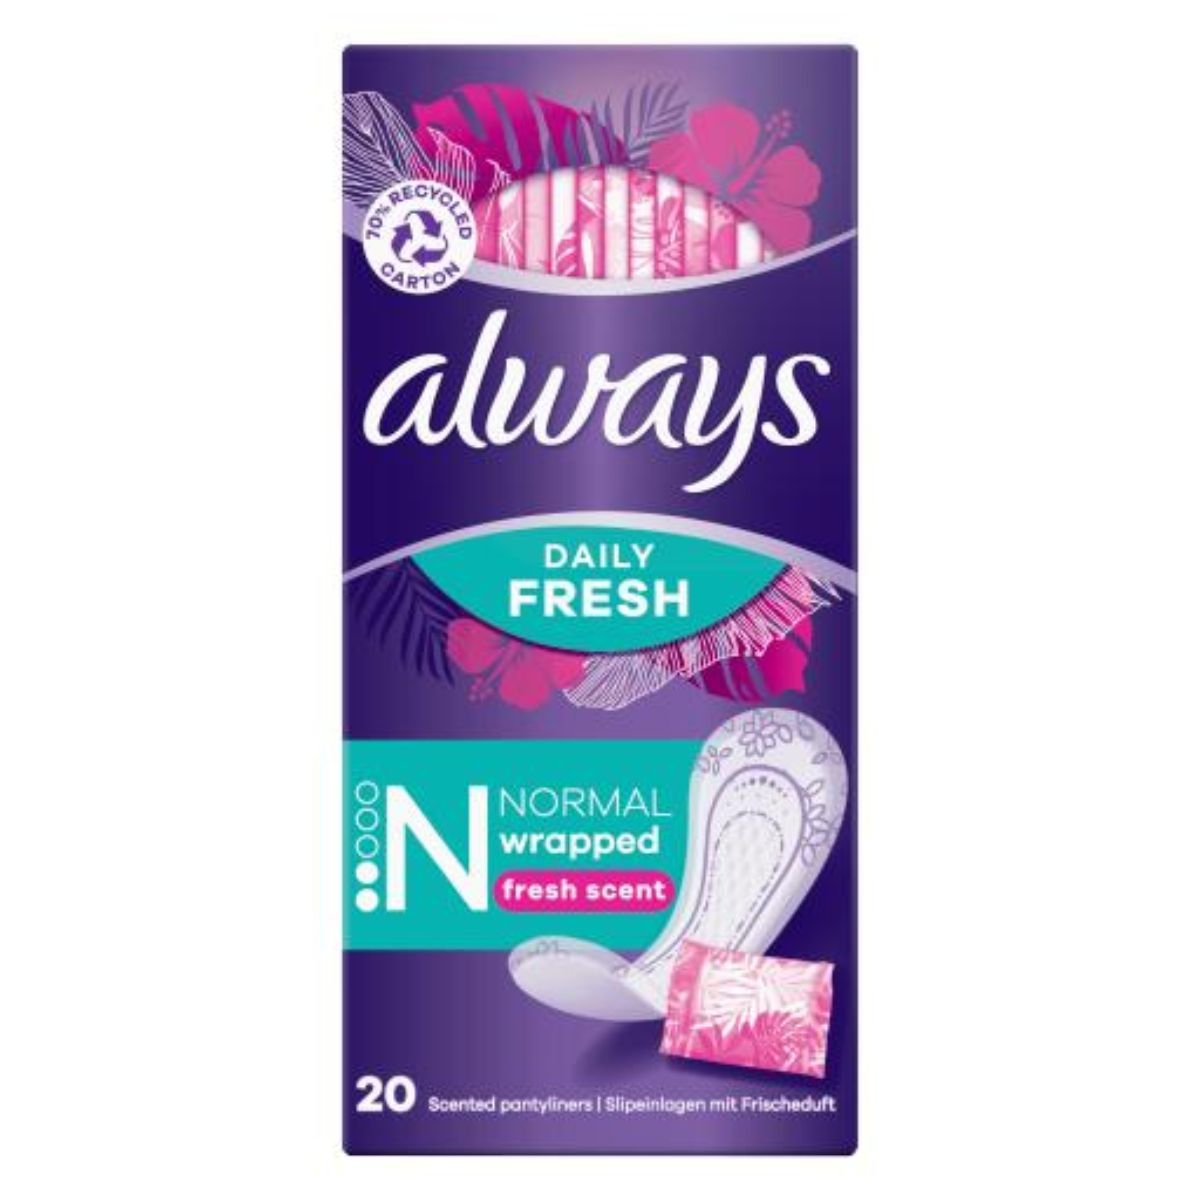 Box of Always - Daily Fresh Normal Wrapped Panty Liners, With Fresh Scent - 20pcs, featuring normal absorbency and Daily Fresh scent, with individually wrapped liners for convenience.